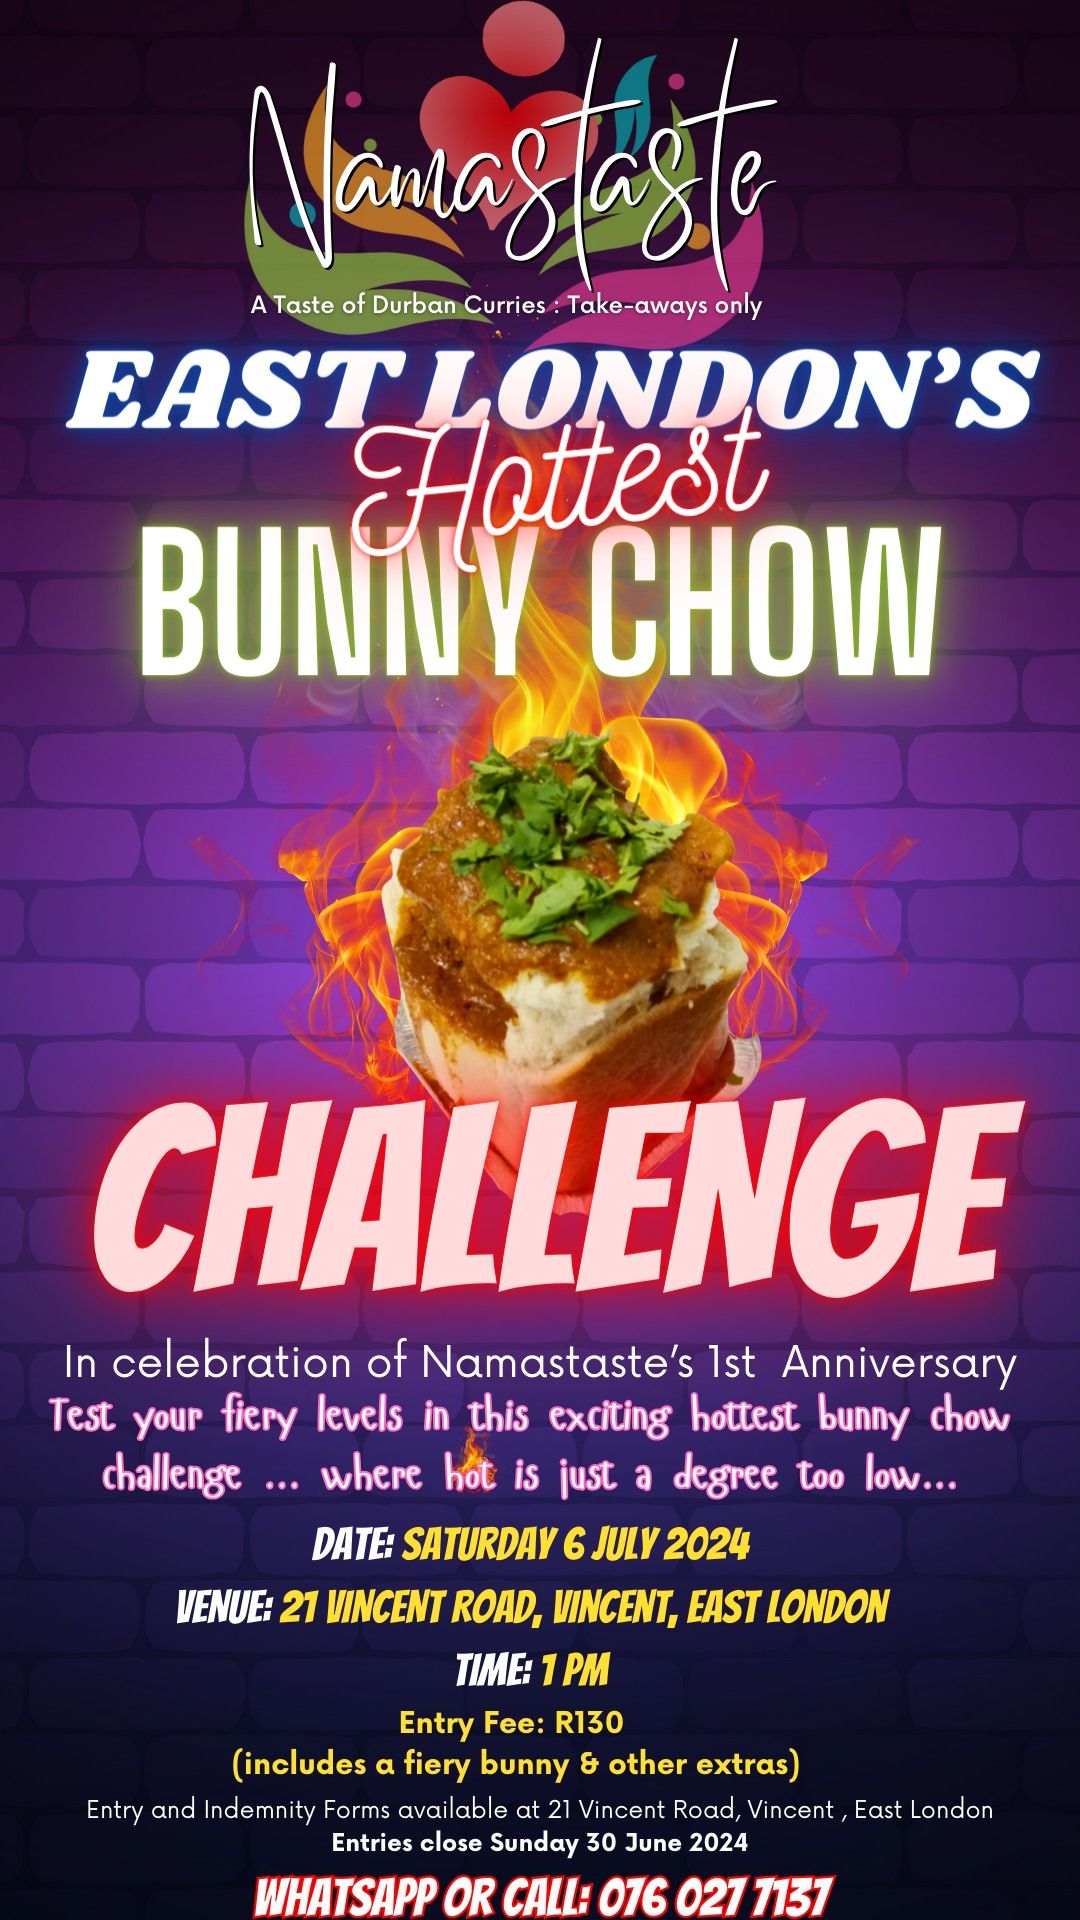 East London's Hottest Bunny Chow Challenge